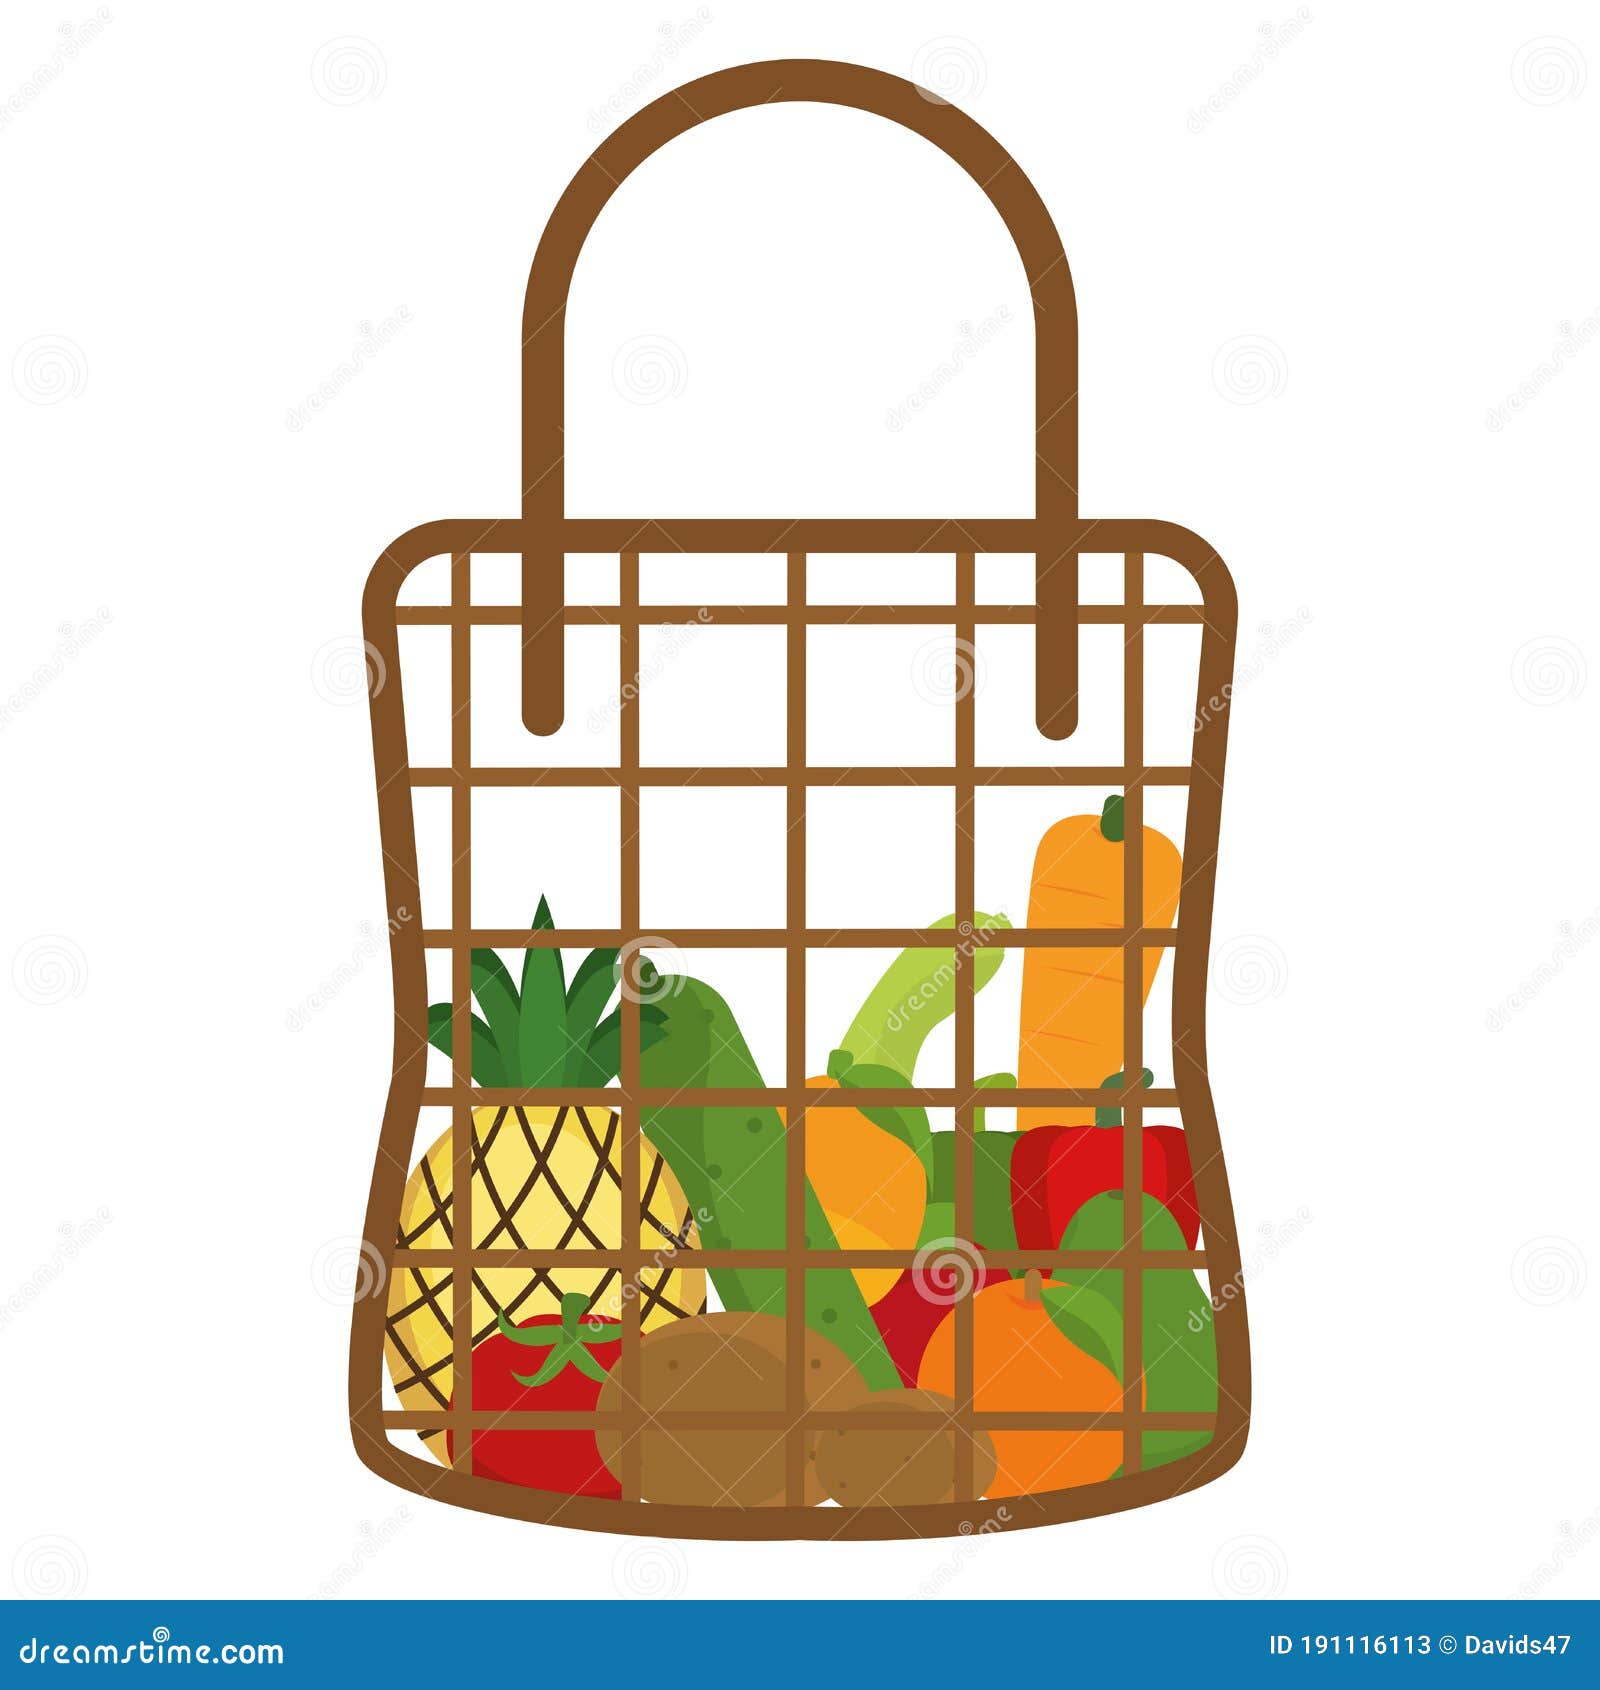 Grocery bag icon stock vector. Illustration of design - 191116113